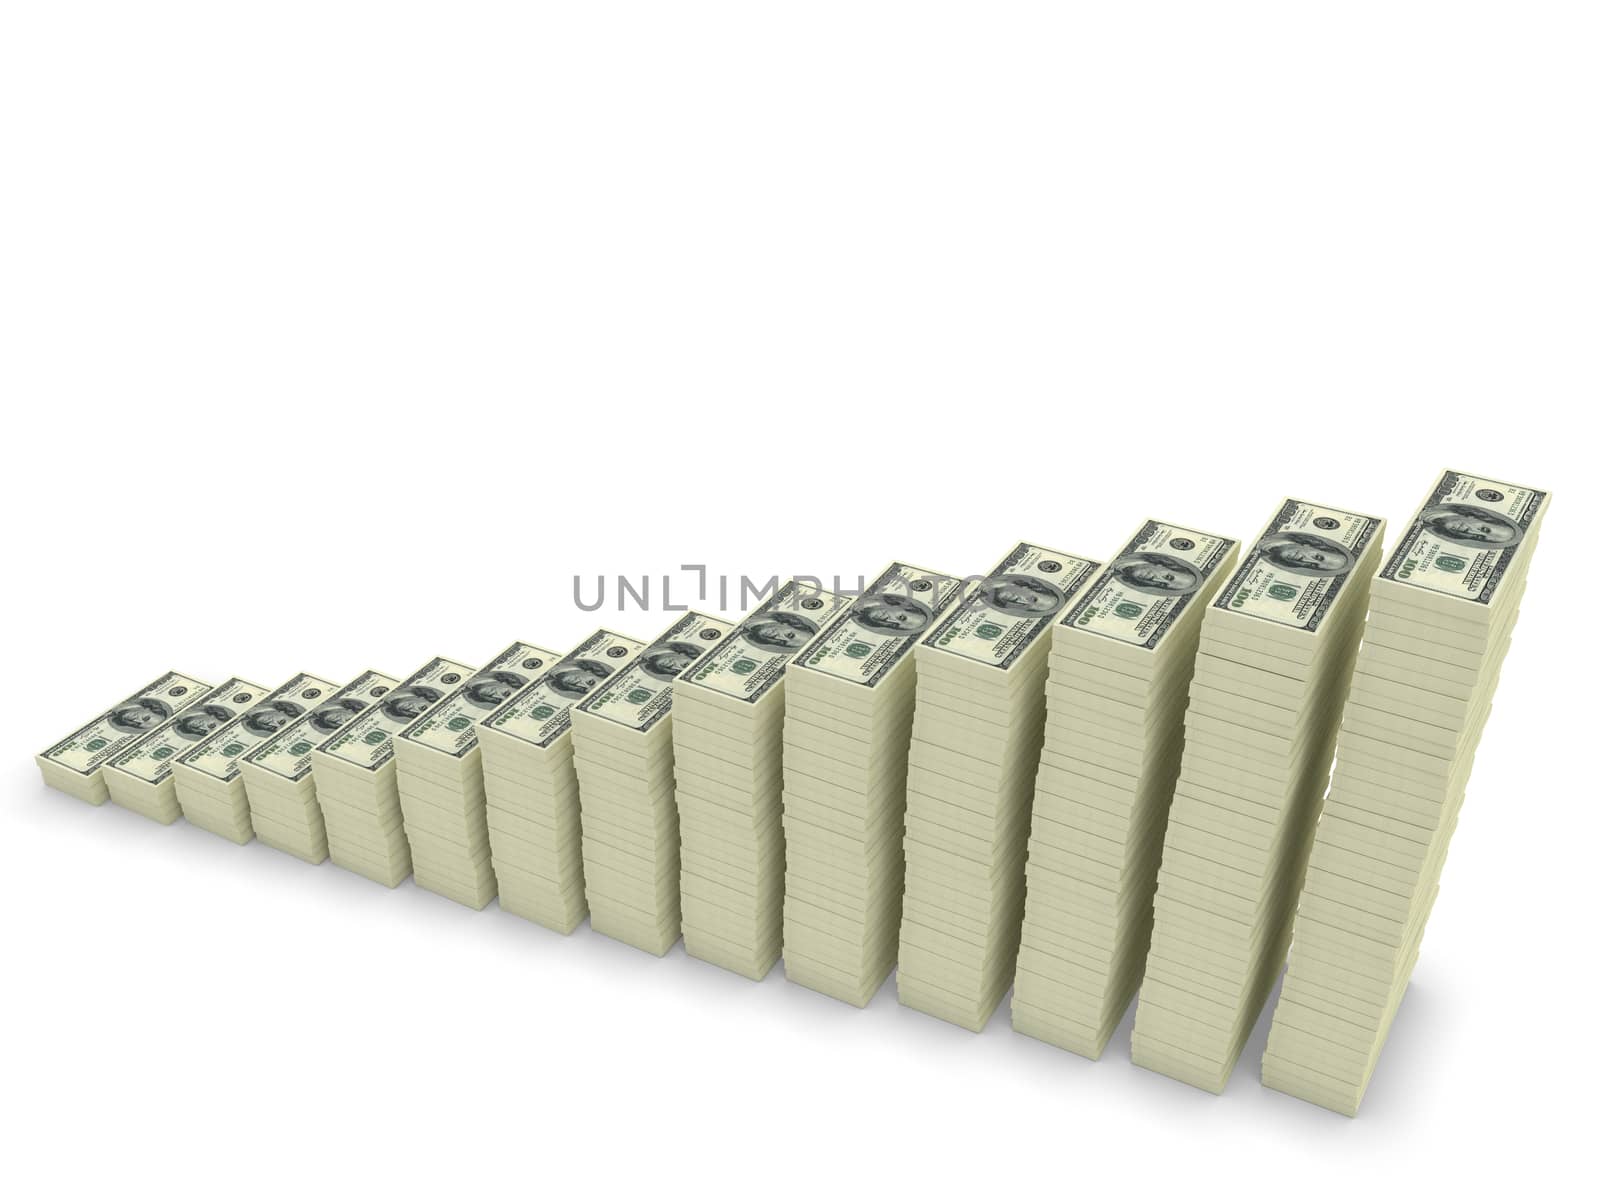 Money stack with blank space for text. Finance concepts by alexkalina